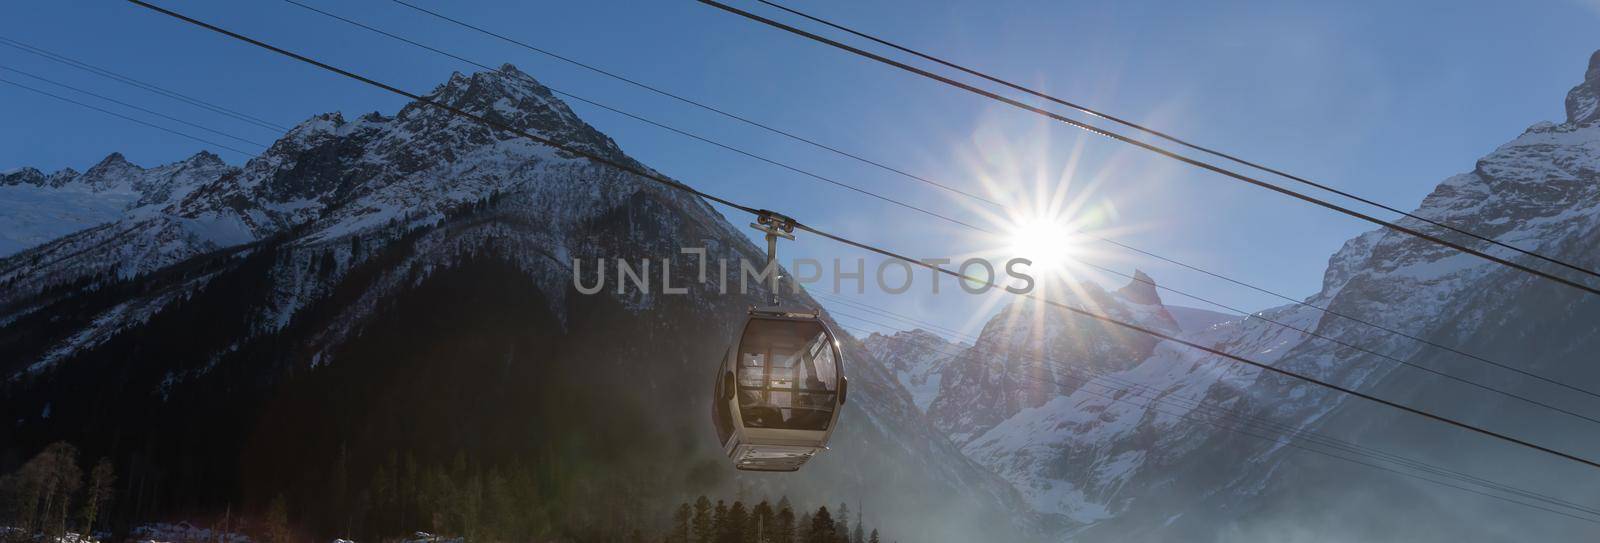 Cable Car in Ski Resort by Mariakray